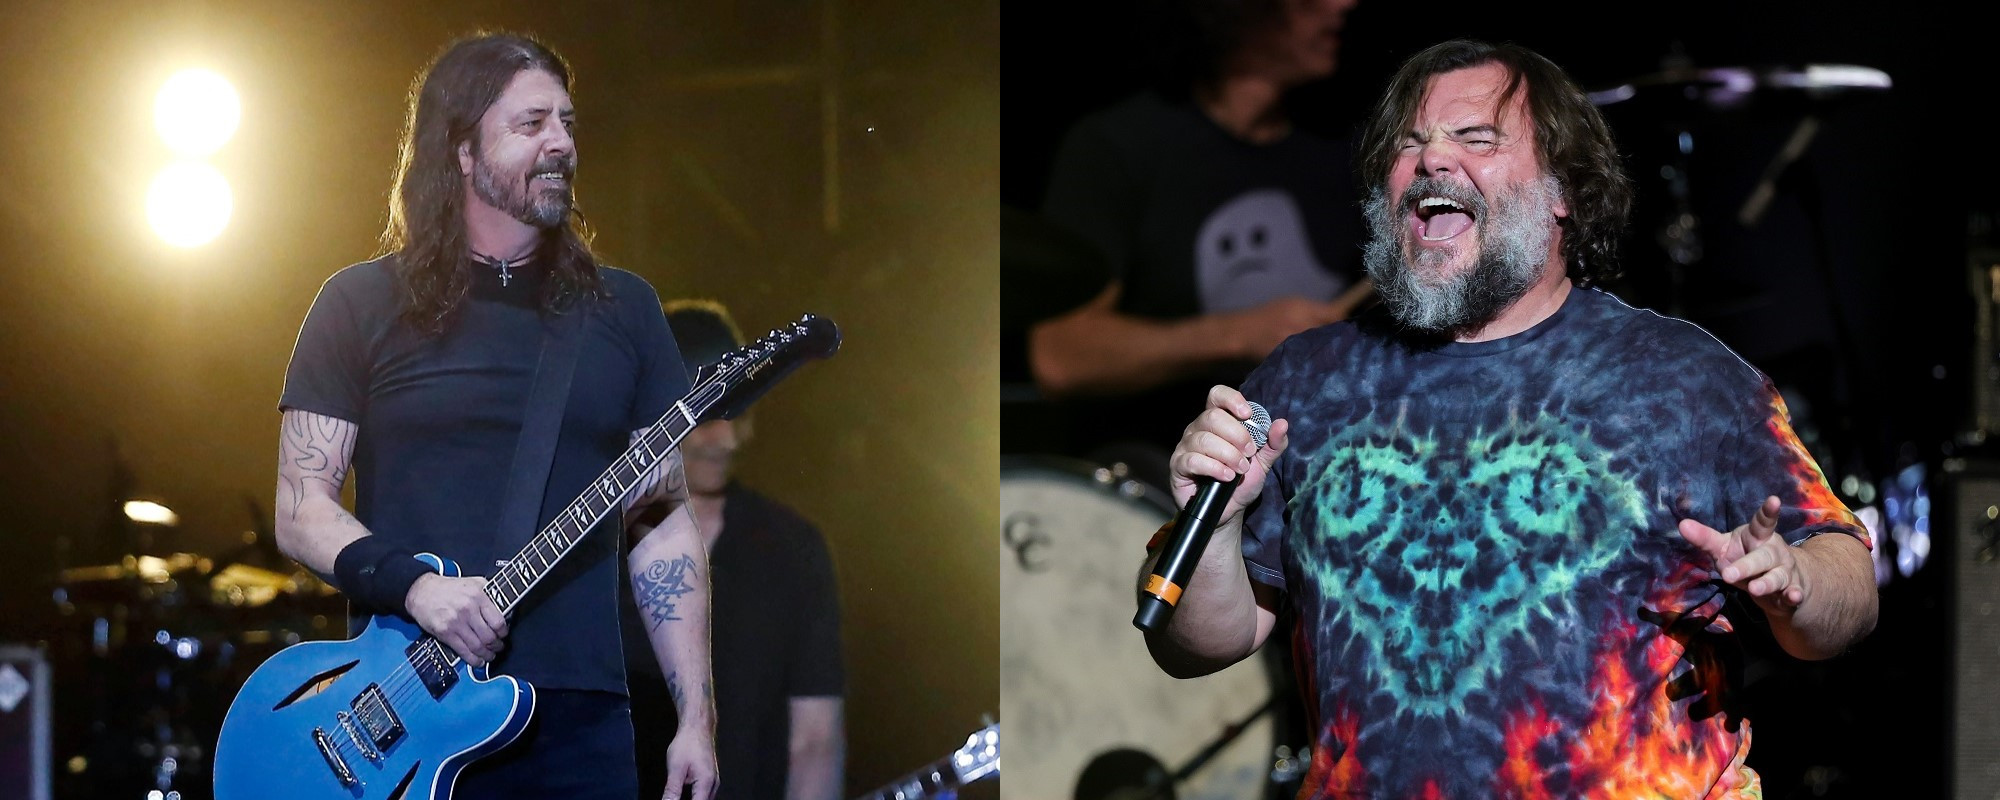 Watch Jack Black Cover AC/DC’s “Big Balls” with the Help of Foo Fighters